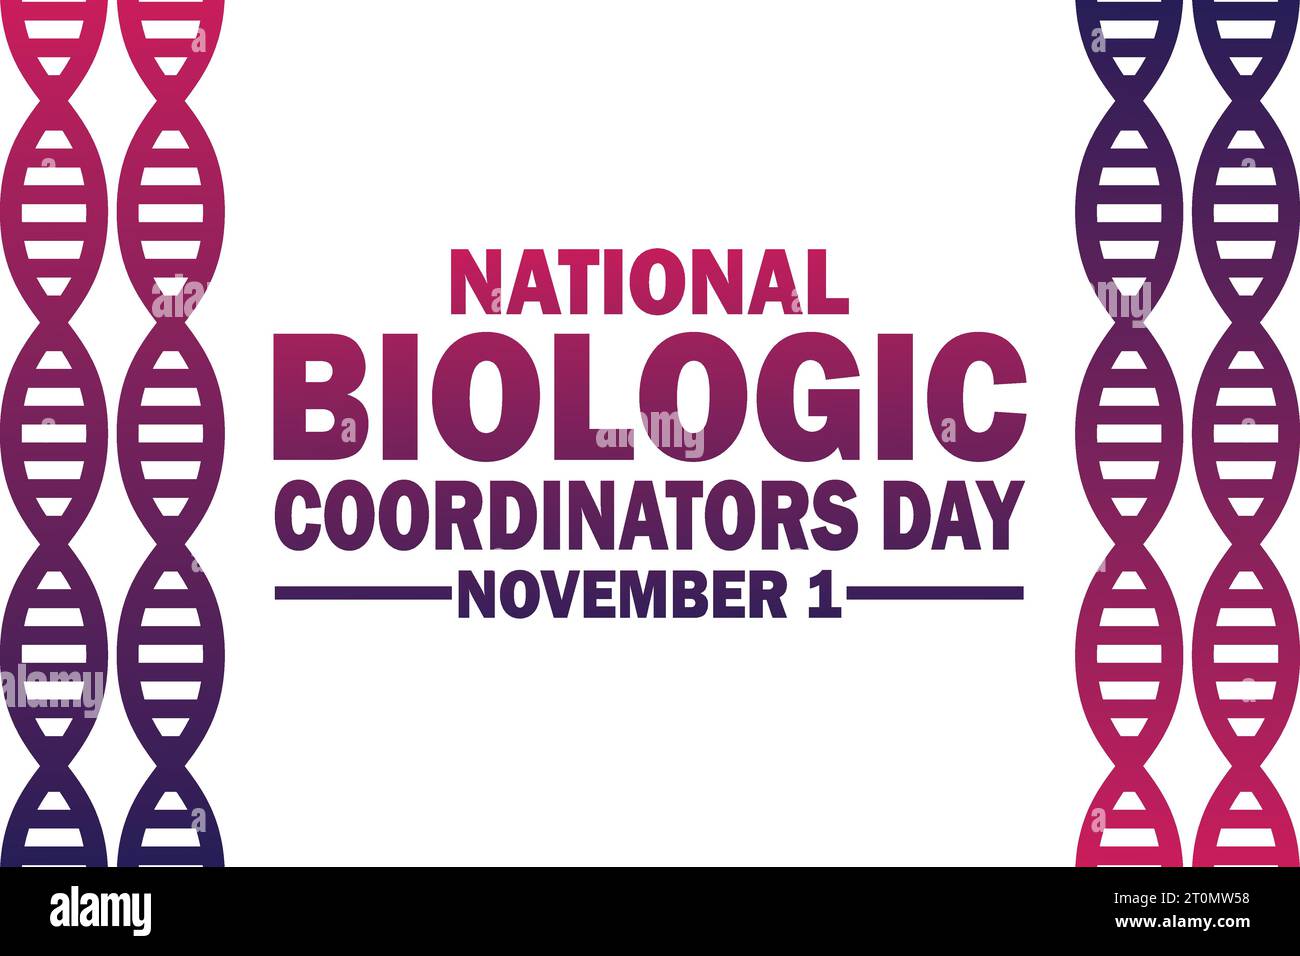 National Biologic Coordinators Day Vector illustration. November 1. Holiday concept. Template for background, banner, card, poster with text Stock Vector